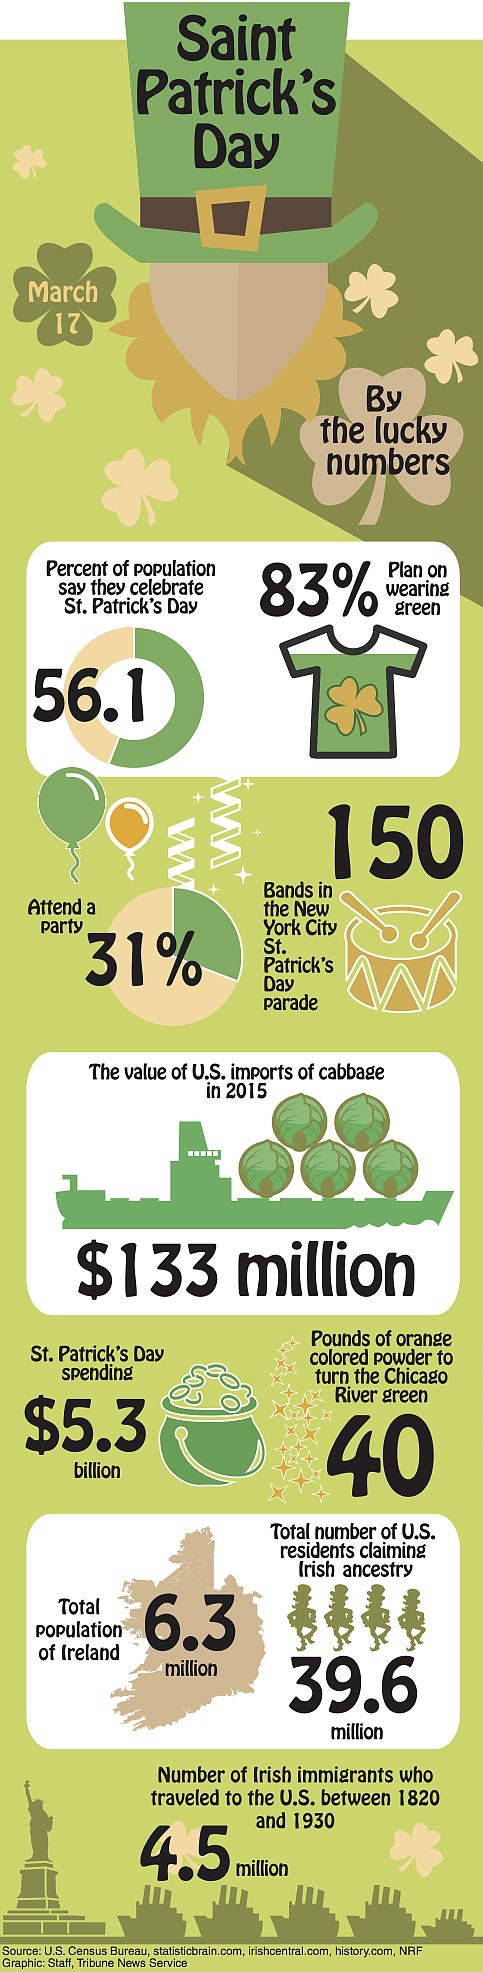 Here are some interesting facts about St. Patricks's day and Ireland.